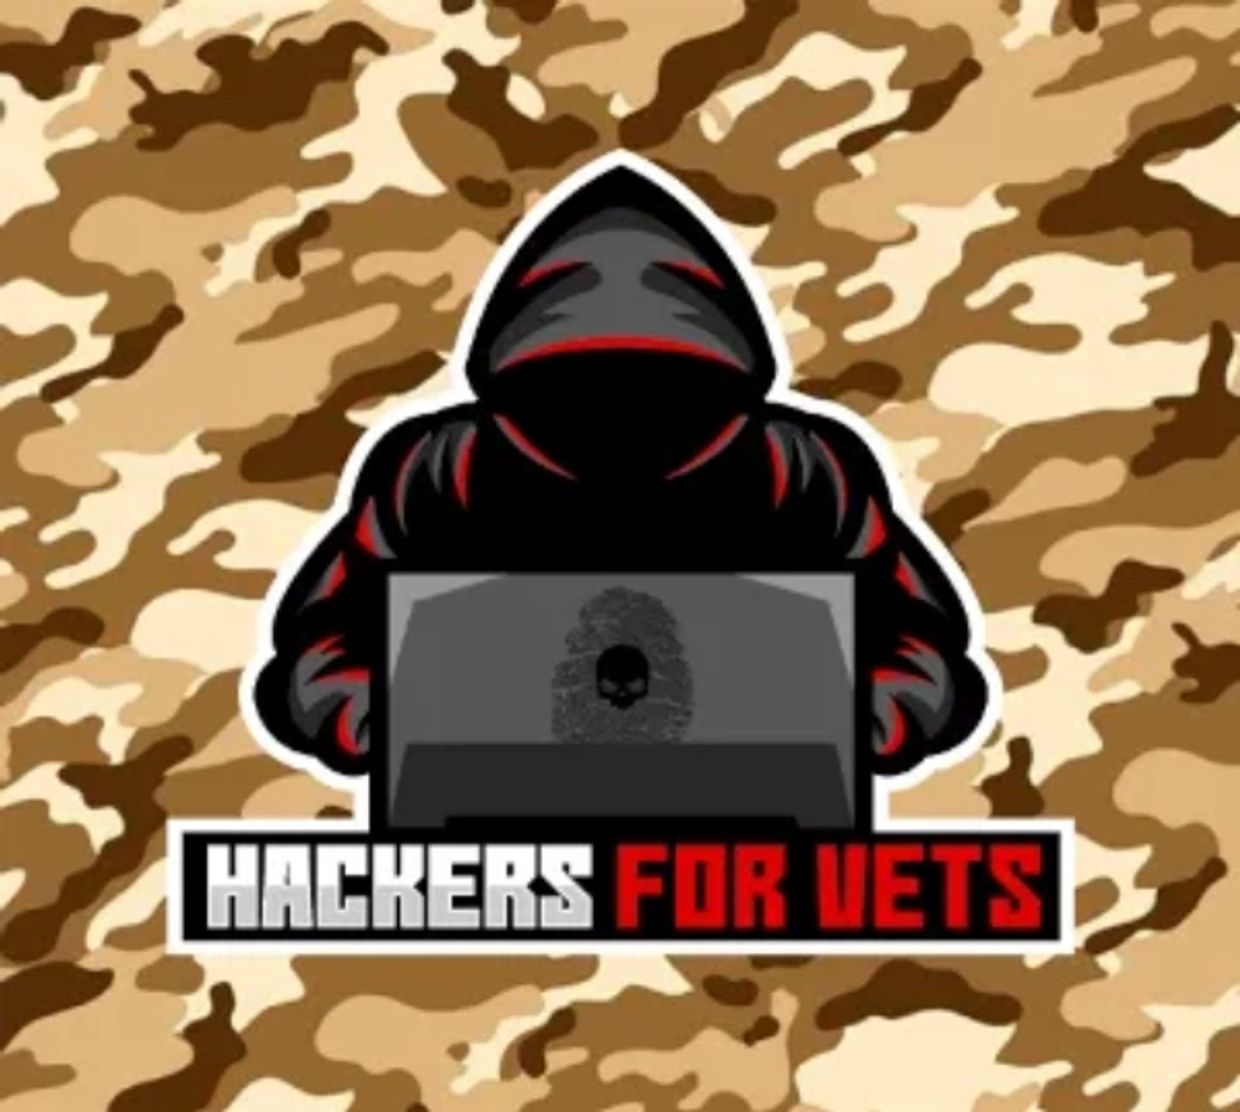 Mike Jones is a Navy Veteran. To donate to this charitable cause email hack4vets@gmail.com